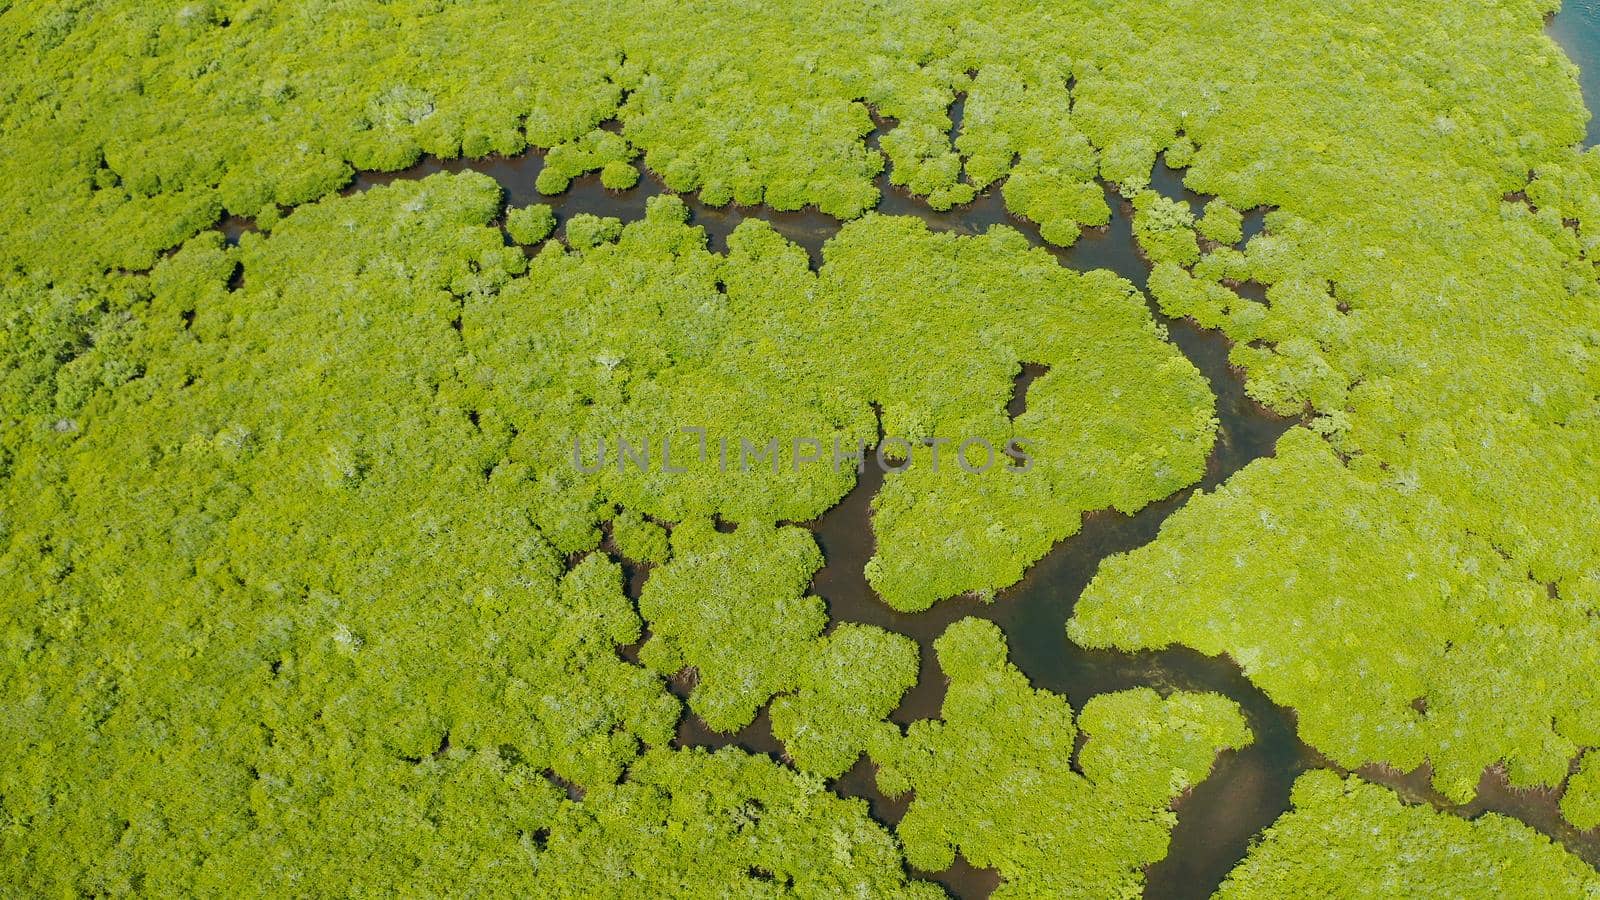 Mangrove rainforest with green trees in the sea water, aerial view. Tropical landscape with mangrove grove.